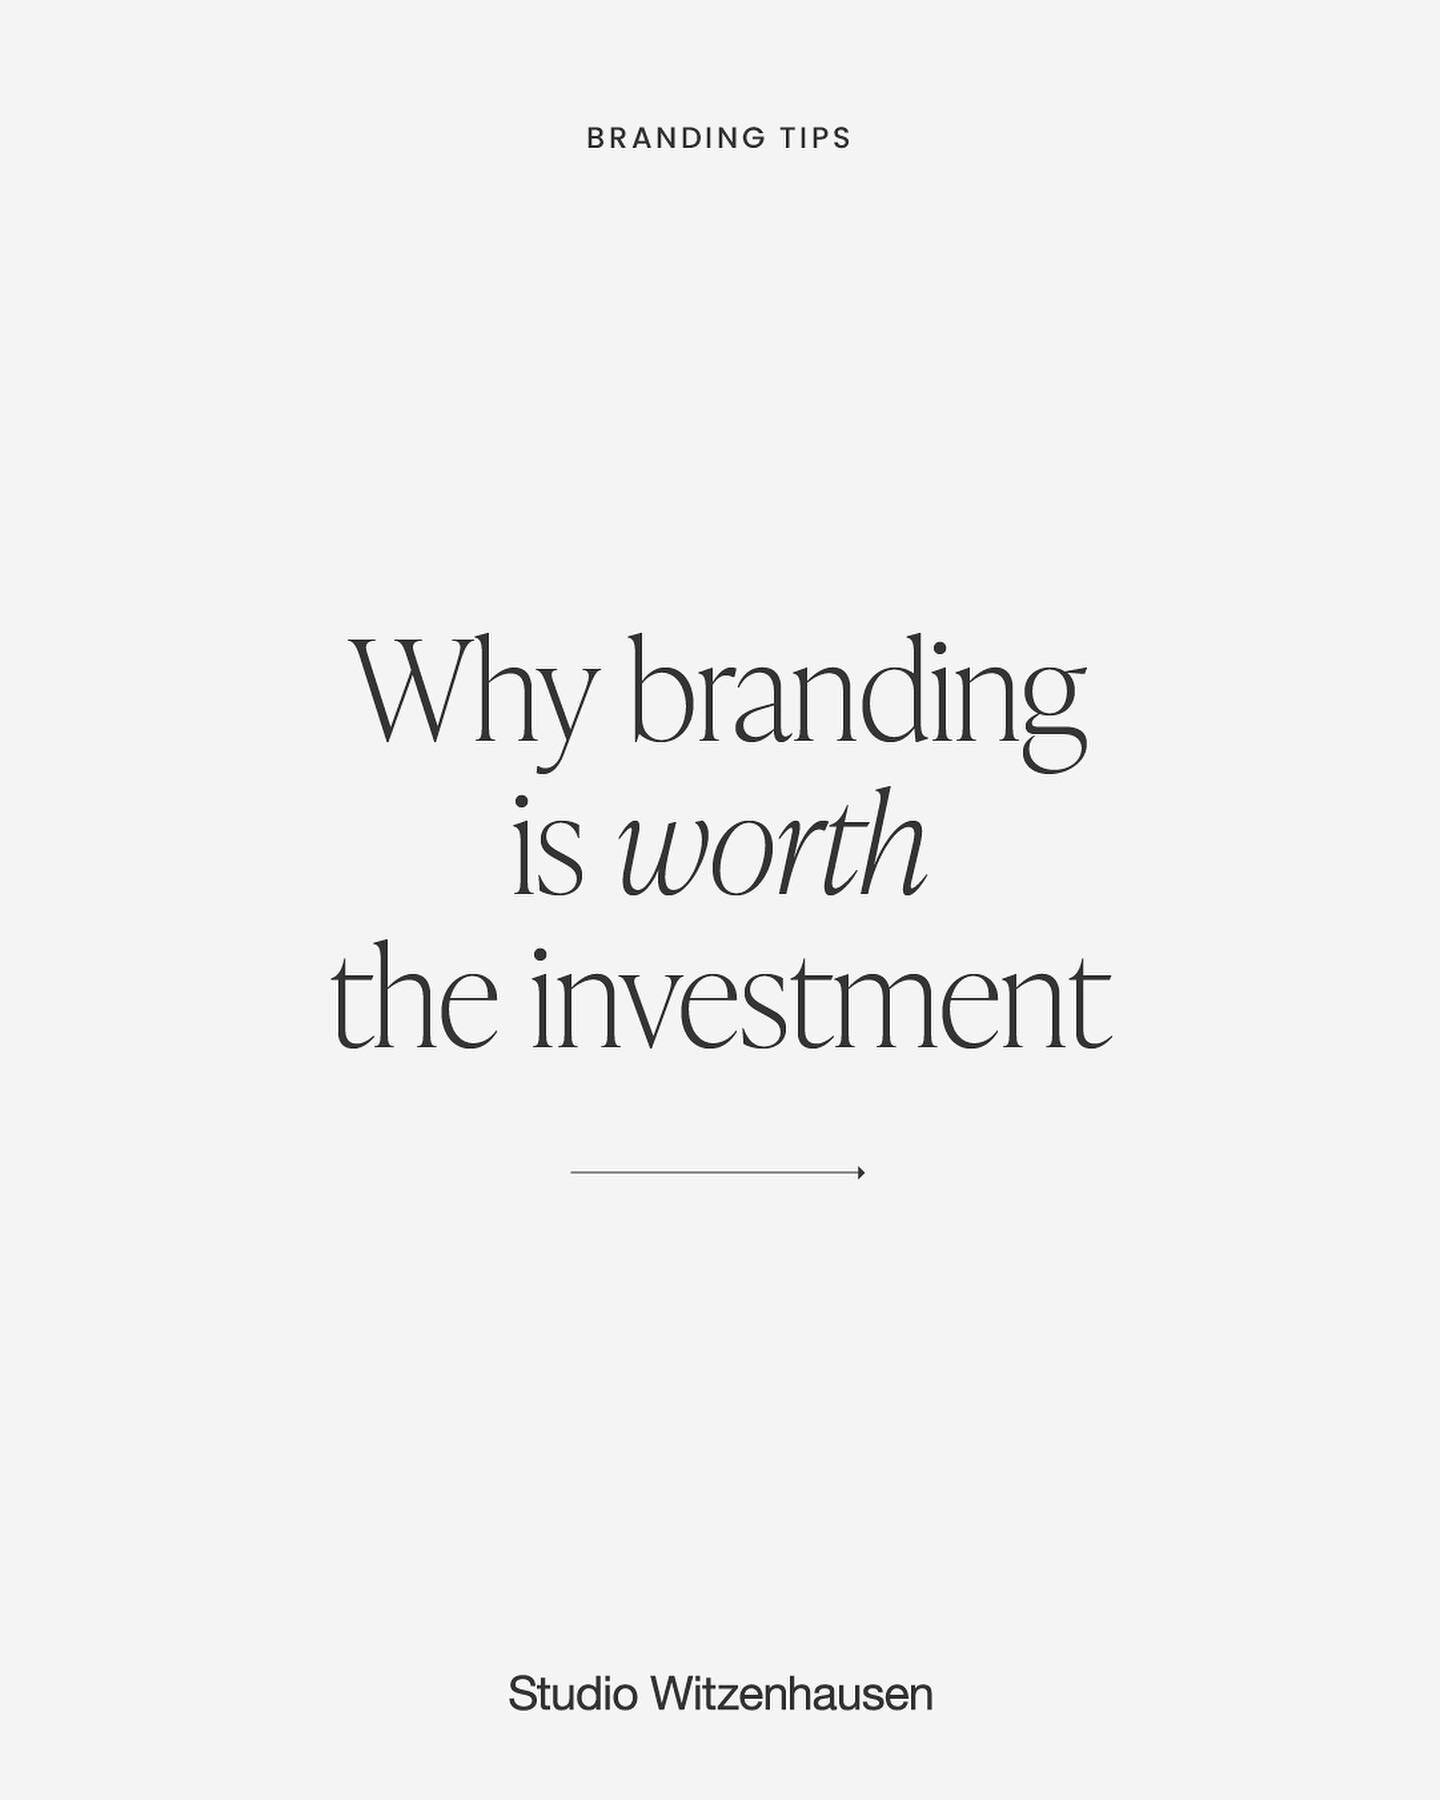 Why you should invest in branding?

Branding is so important and beneficial for you and your business. Your brand is so much more than a logo. Investing in high quality branding can impact your business in so many ways. Swipe to the left to see a few